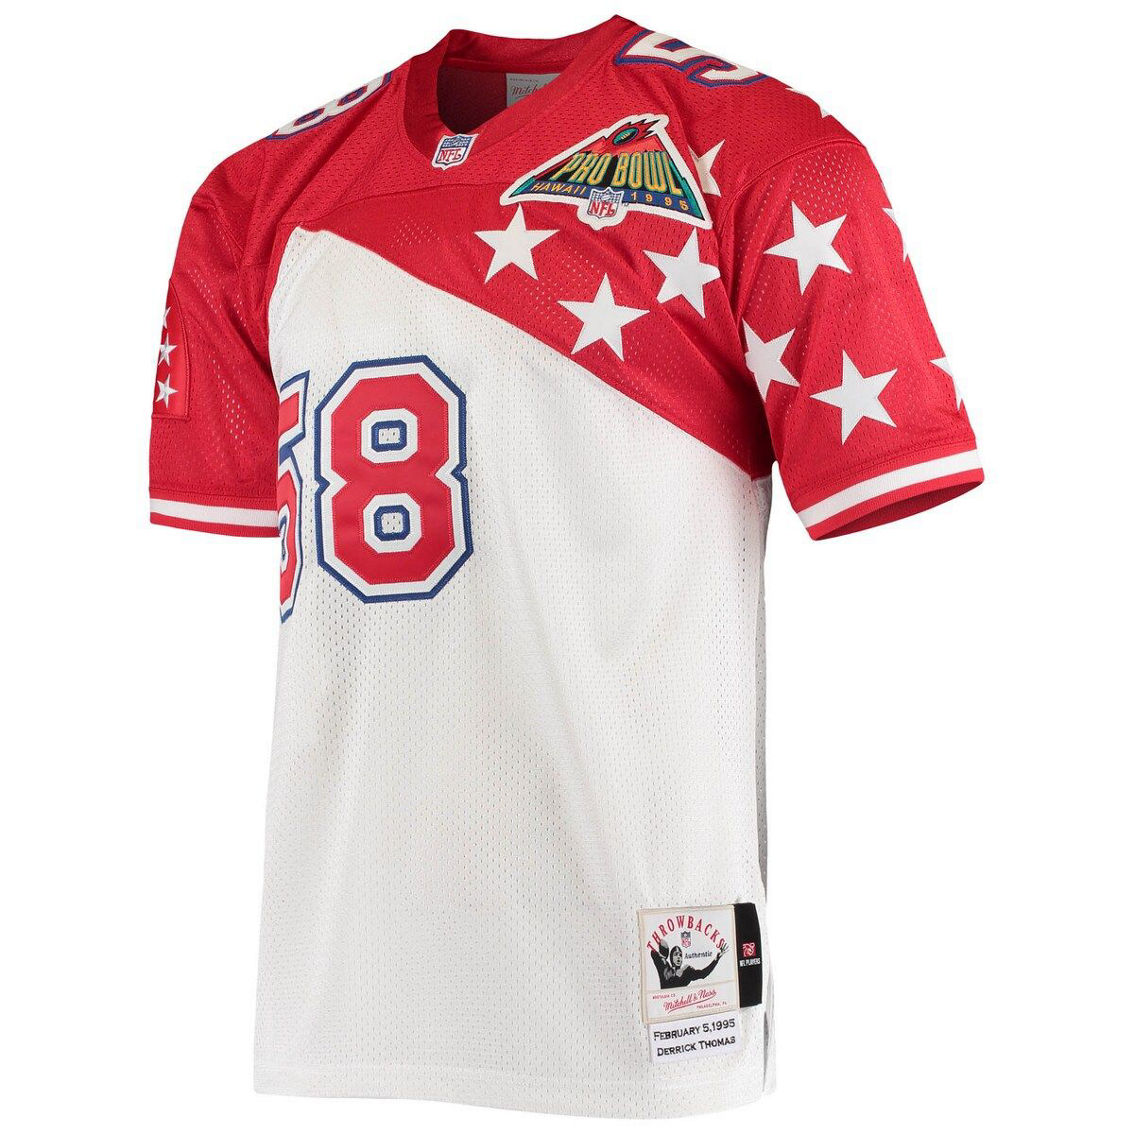 Mitchell & Ness Men's Derrick Thomas White/Red AFC 1995 Pro Bowl Authentic Jersey - Image 3 of 4